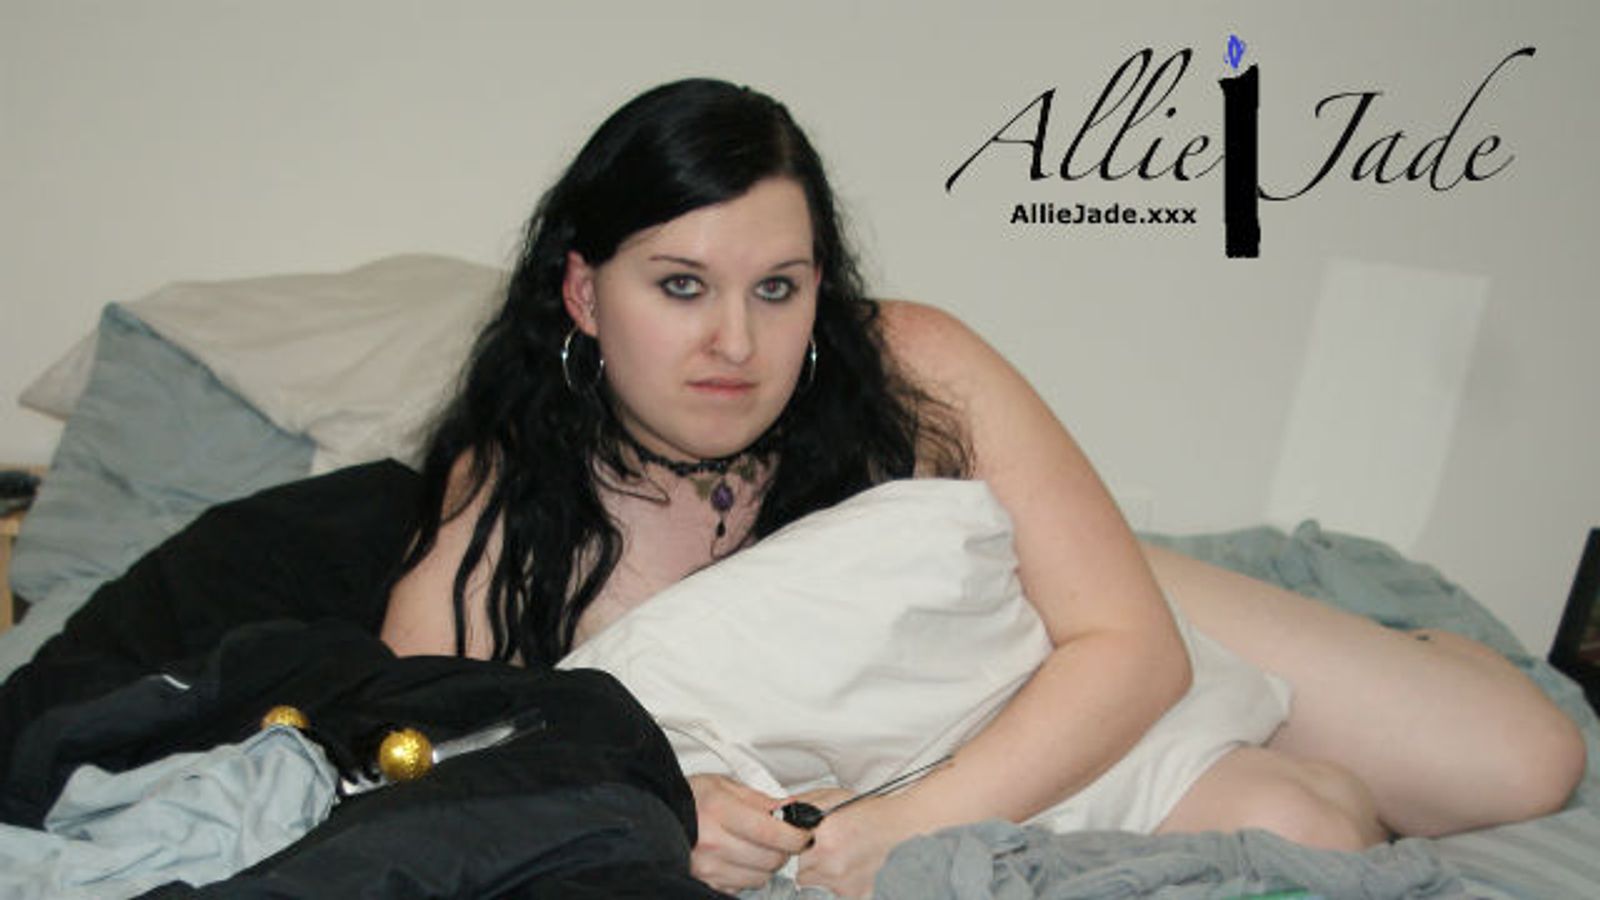 Trans Performer Allie Jade Launches Website with Grooby